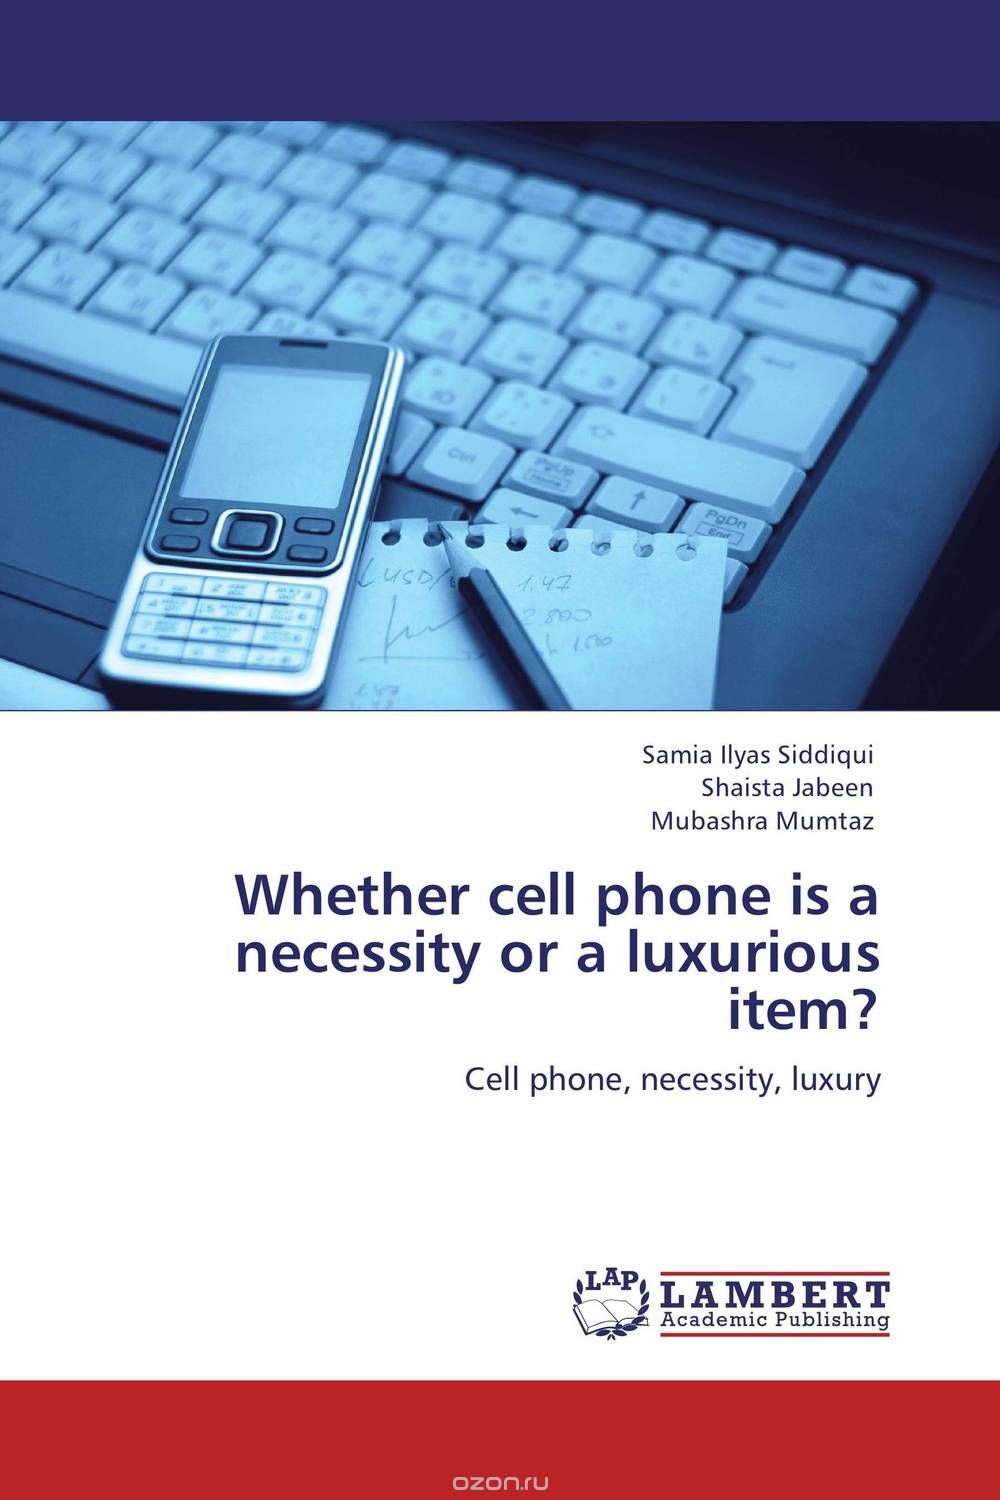 Whether cell phone is a necessity or a luxurious item?